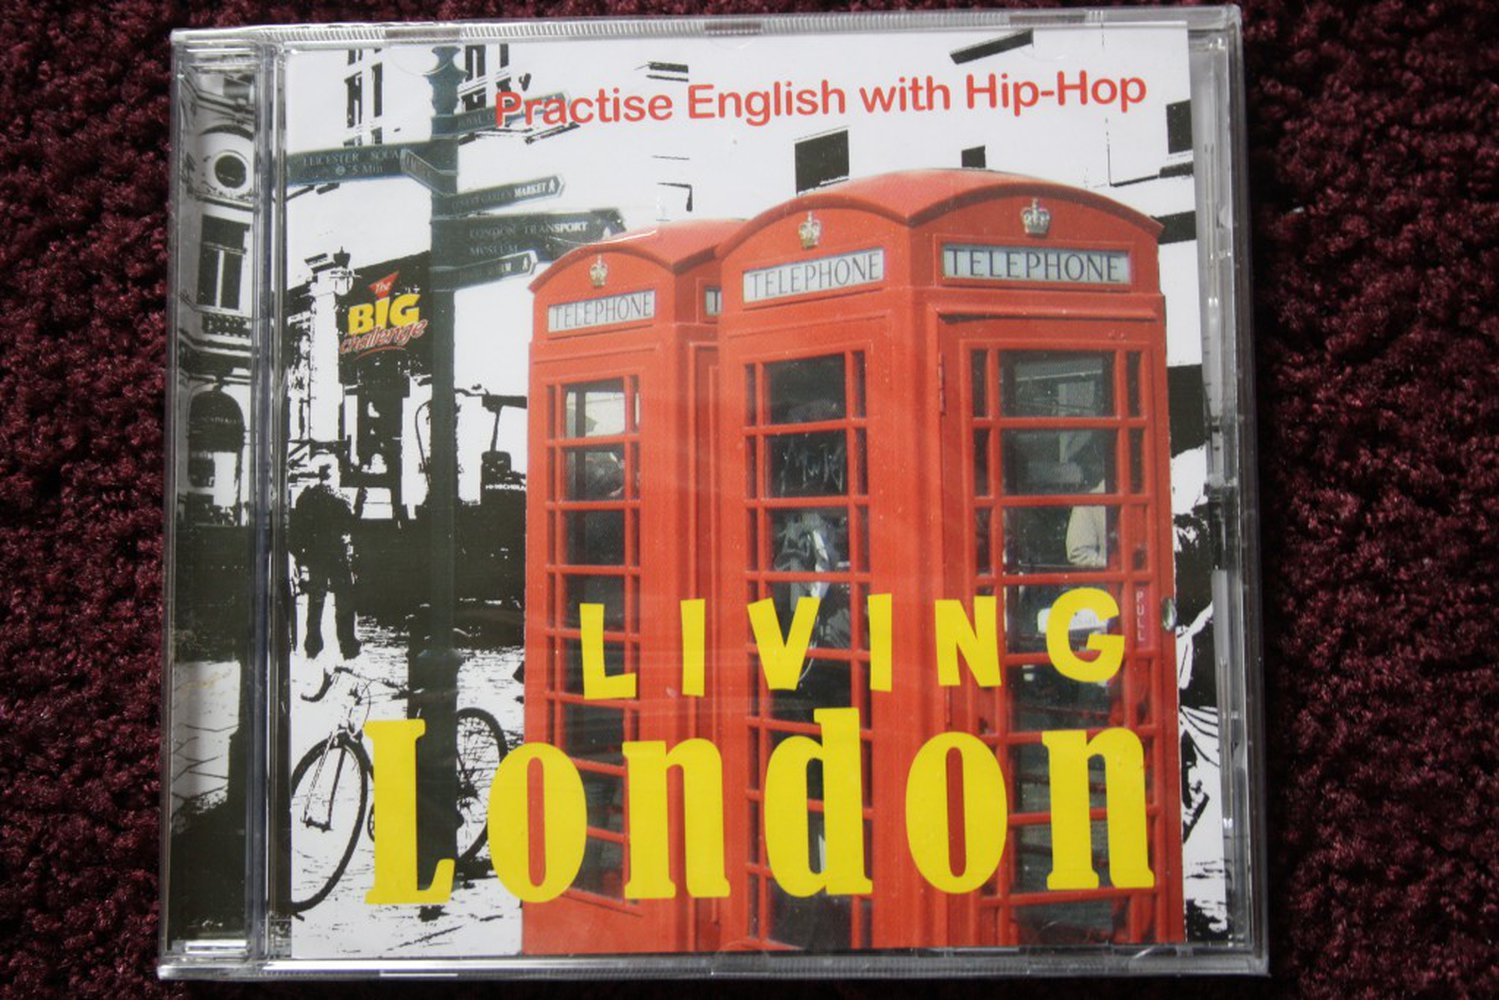 Living London – Practise English with Hip-Hop